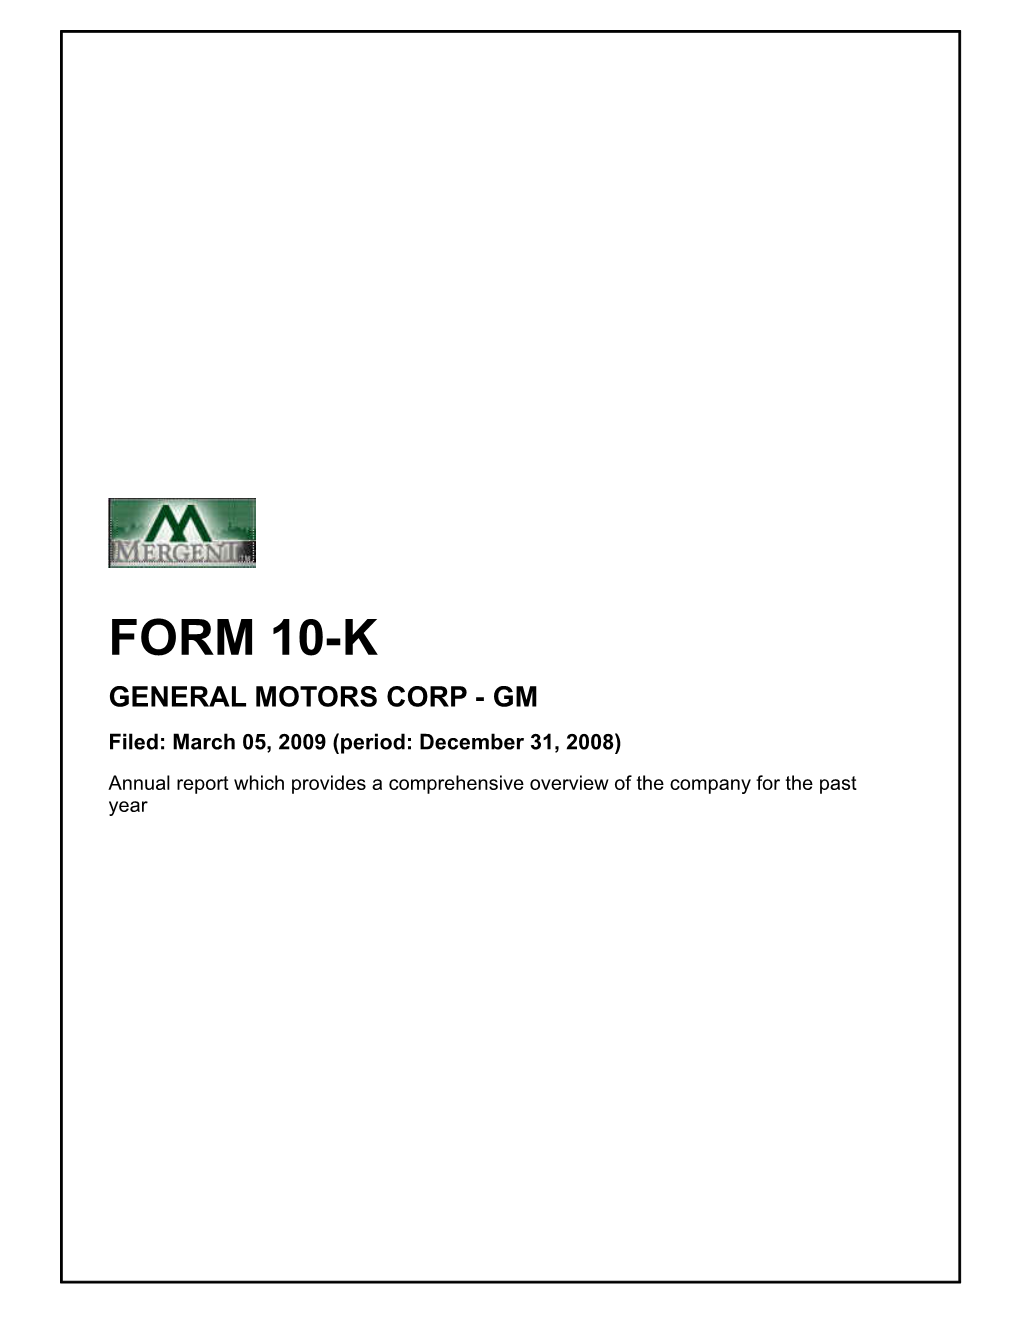 FORM 10-K GENERAL MOTORS CORP - GM Filed: March 05, 2009 (Period: December 31, 2008)